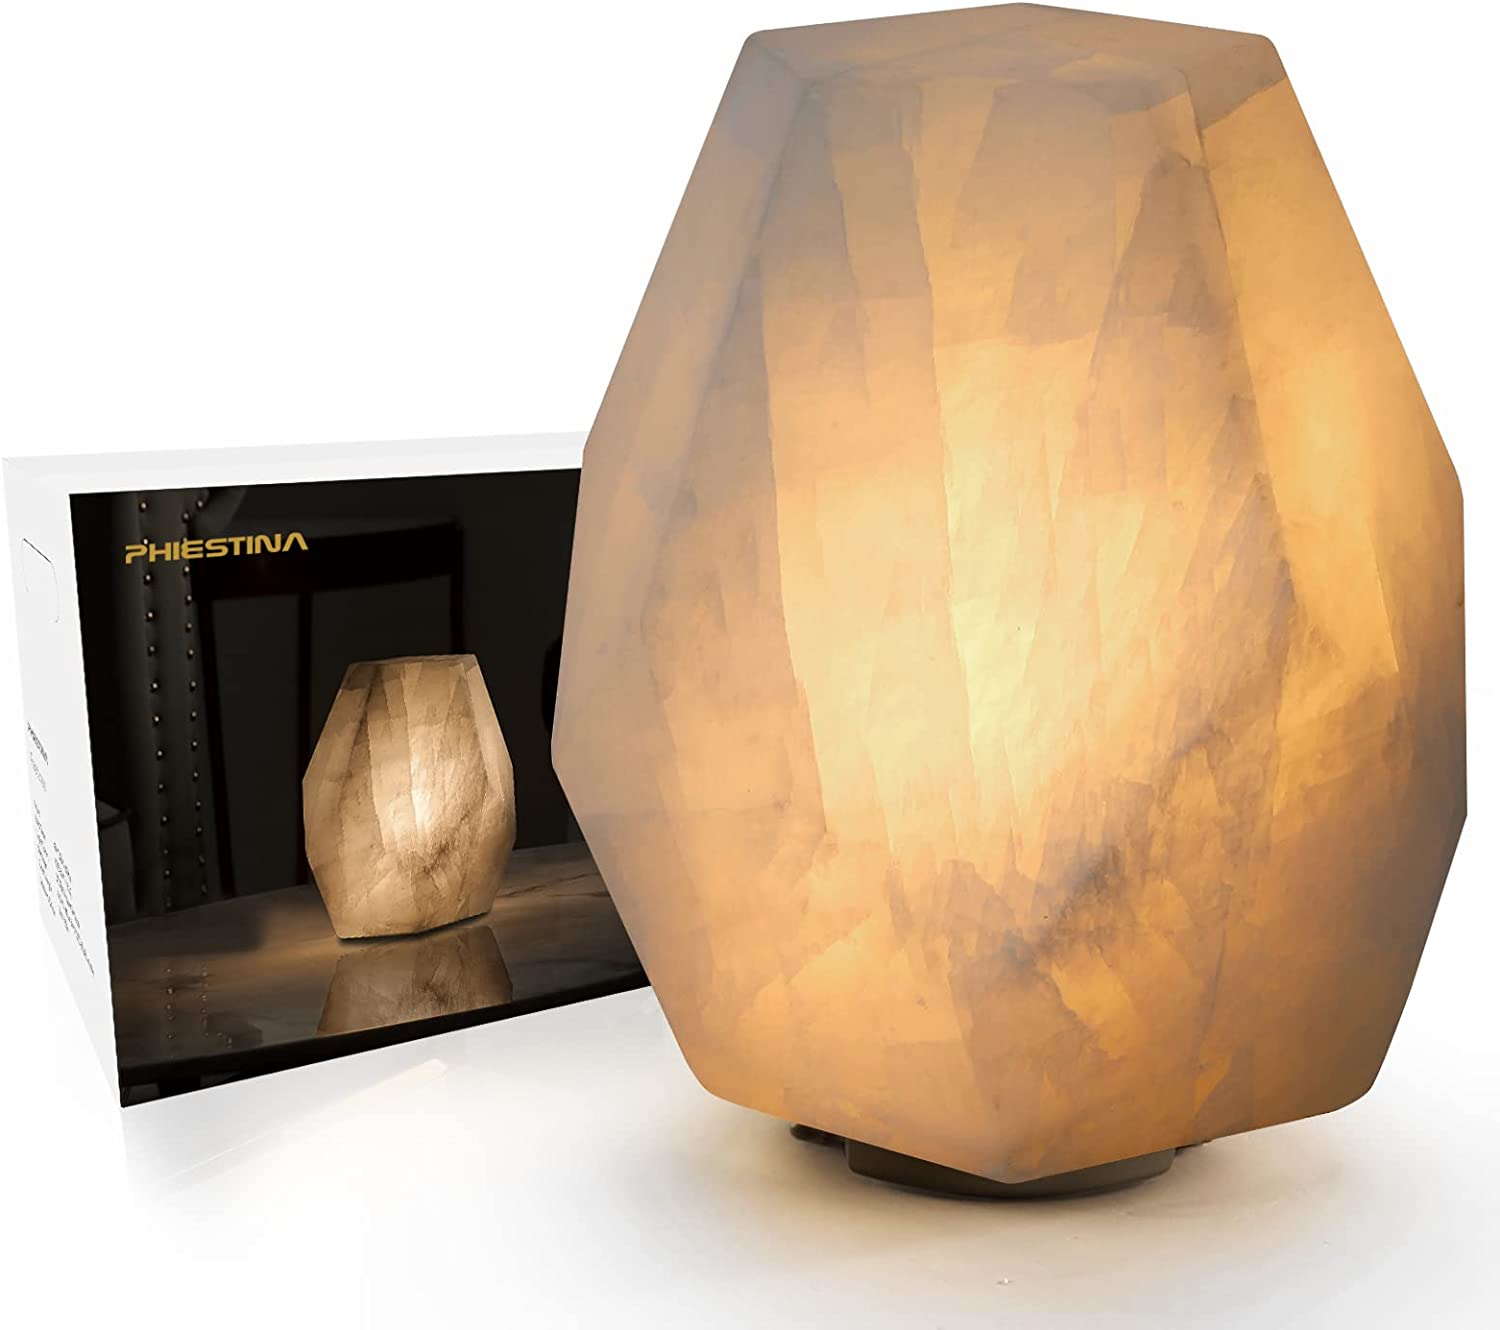 Handcrafted Solid Stone Lamp Carved from Natural Calcite, Unique Lamp with One-of-a-Kind Crystal Texture, Dimmable Small Table Lamp for Bedside Bedroom, Accent Lamp by Phiestina, Pentagon White